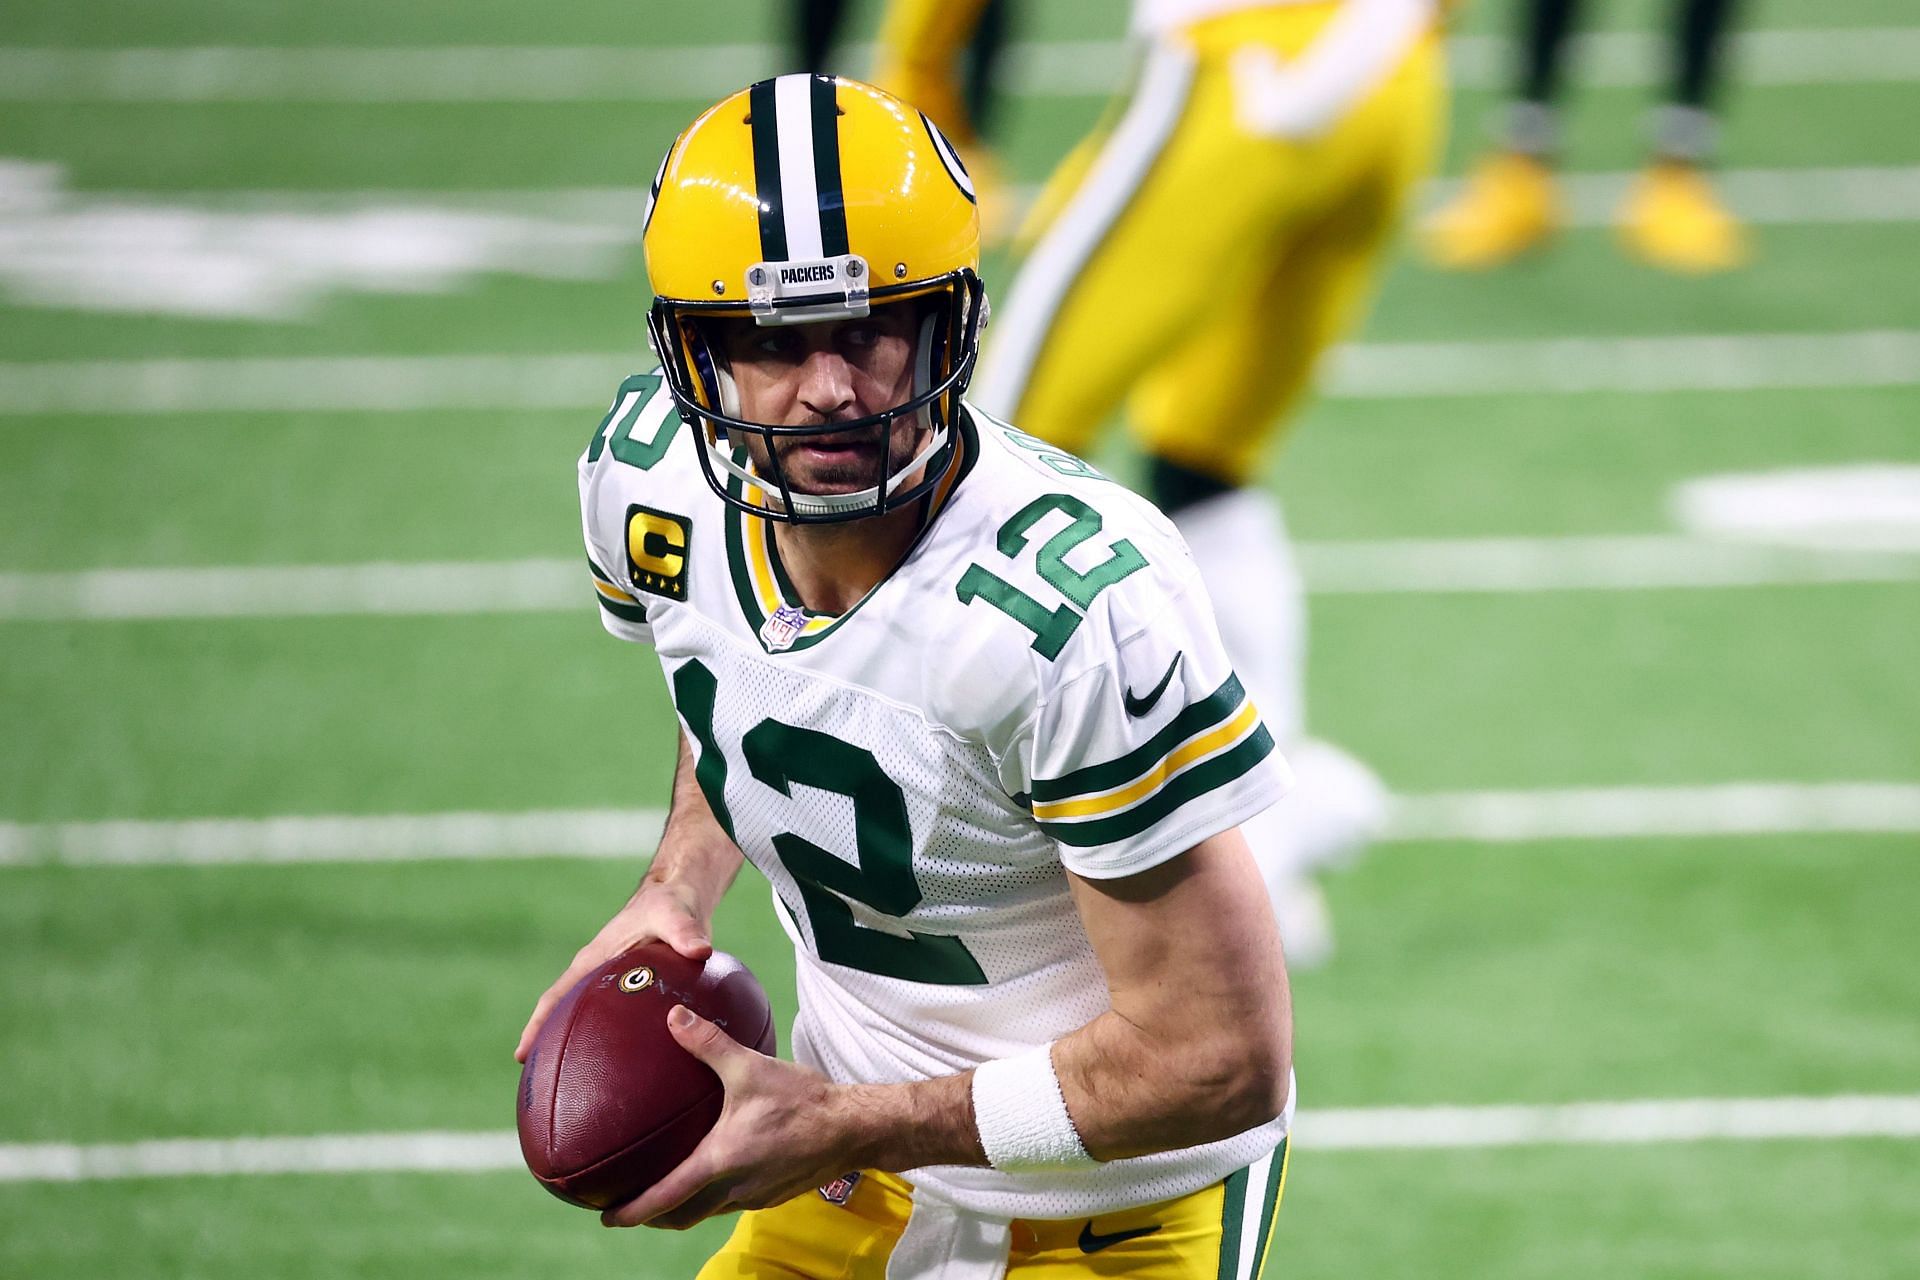 What did Terry Bradshaw say about Aaron Rodgers' COVID vaccine saga?